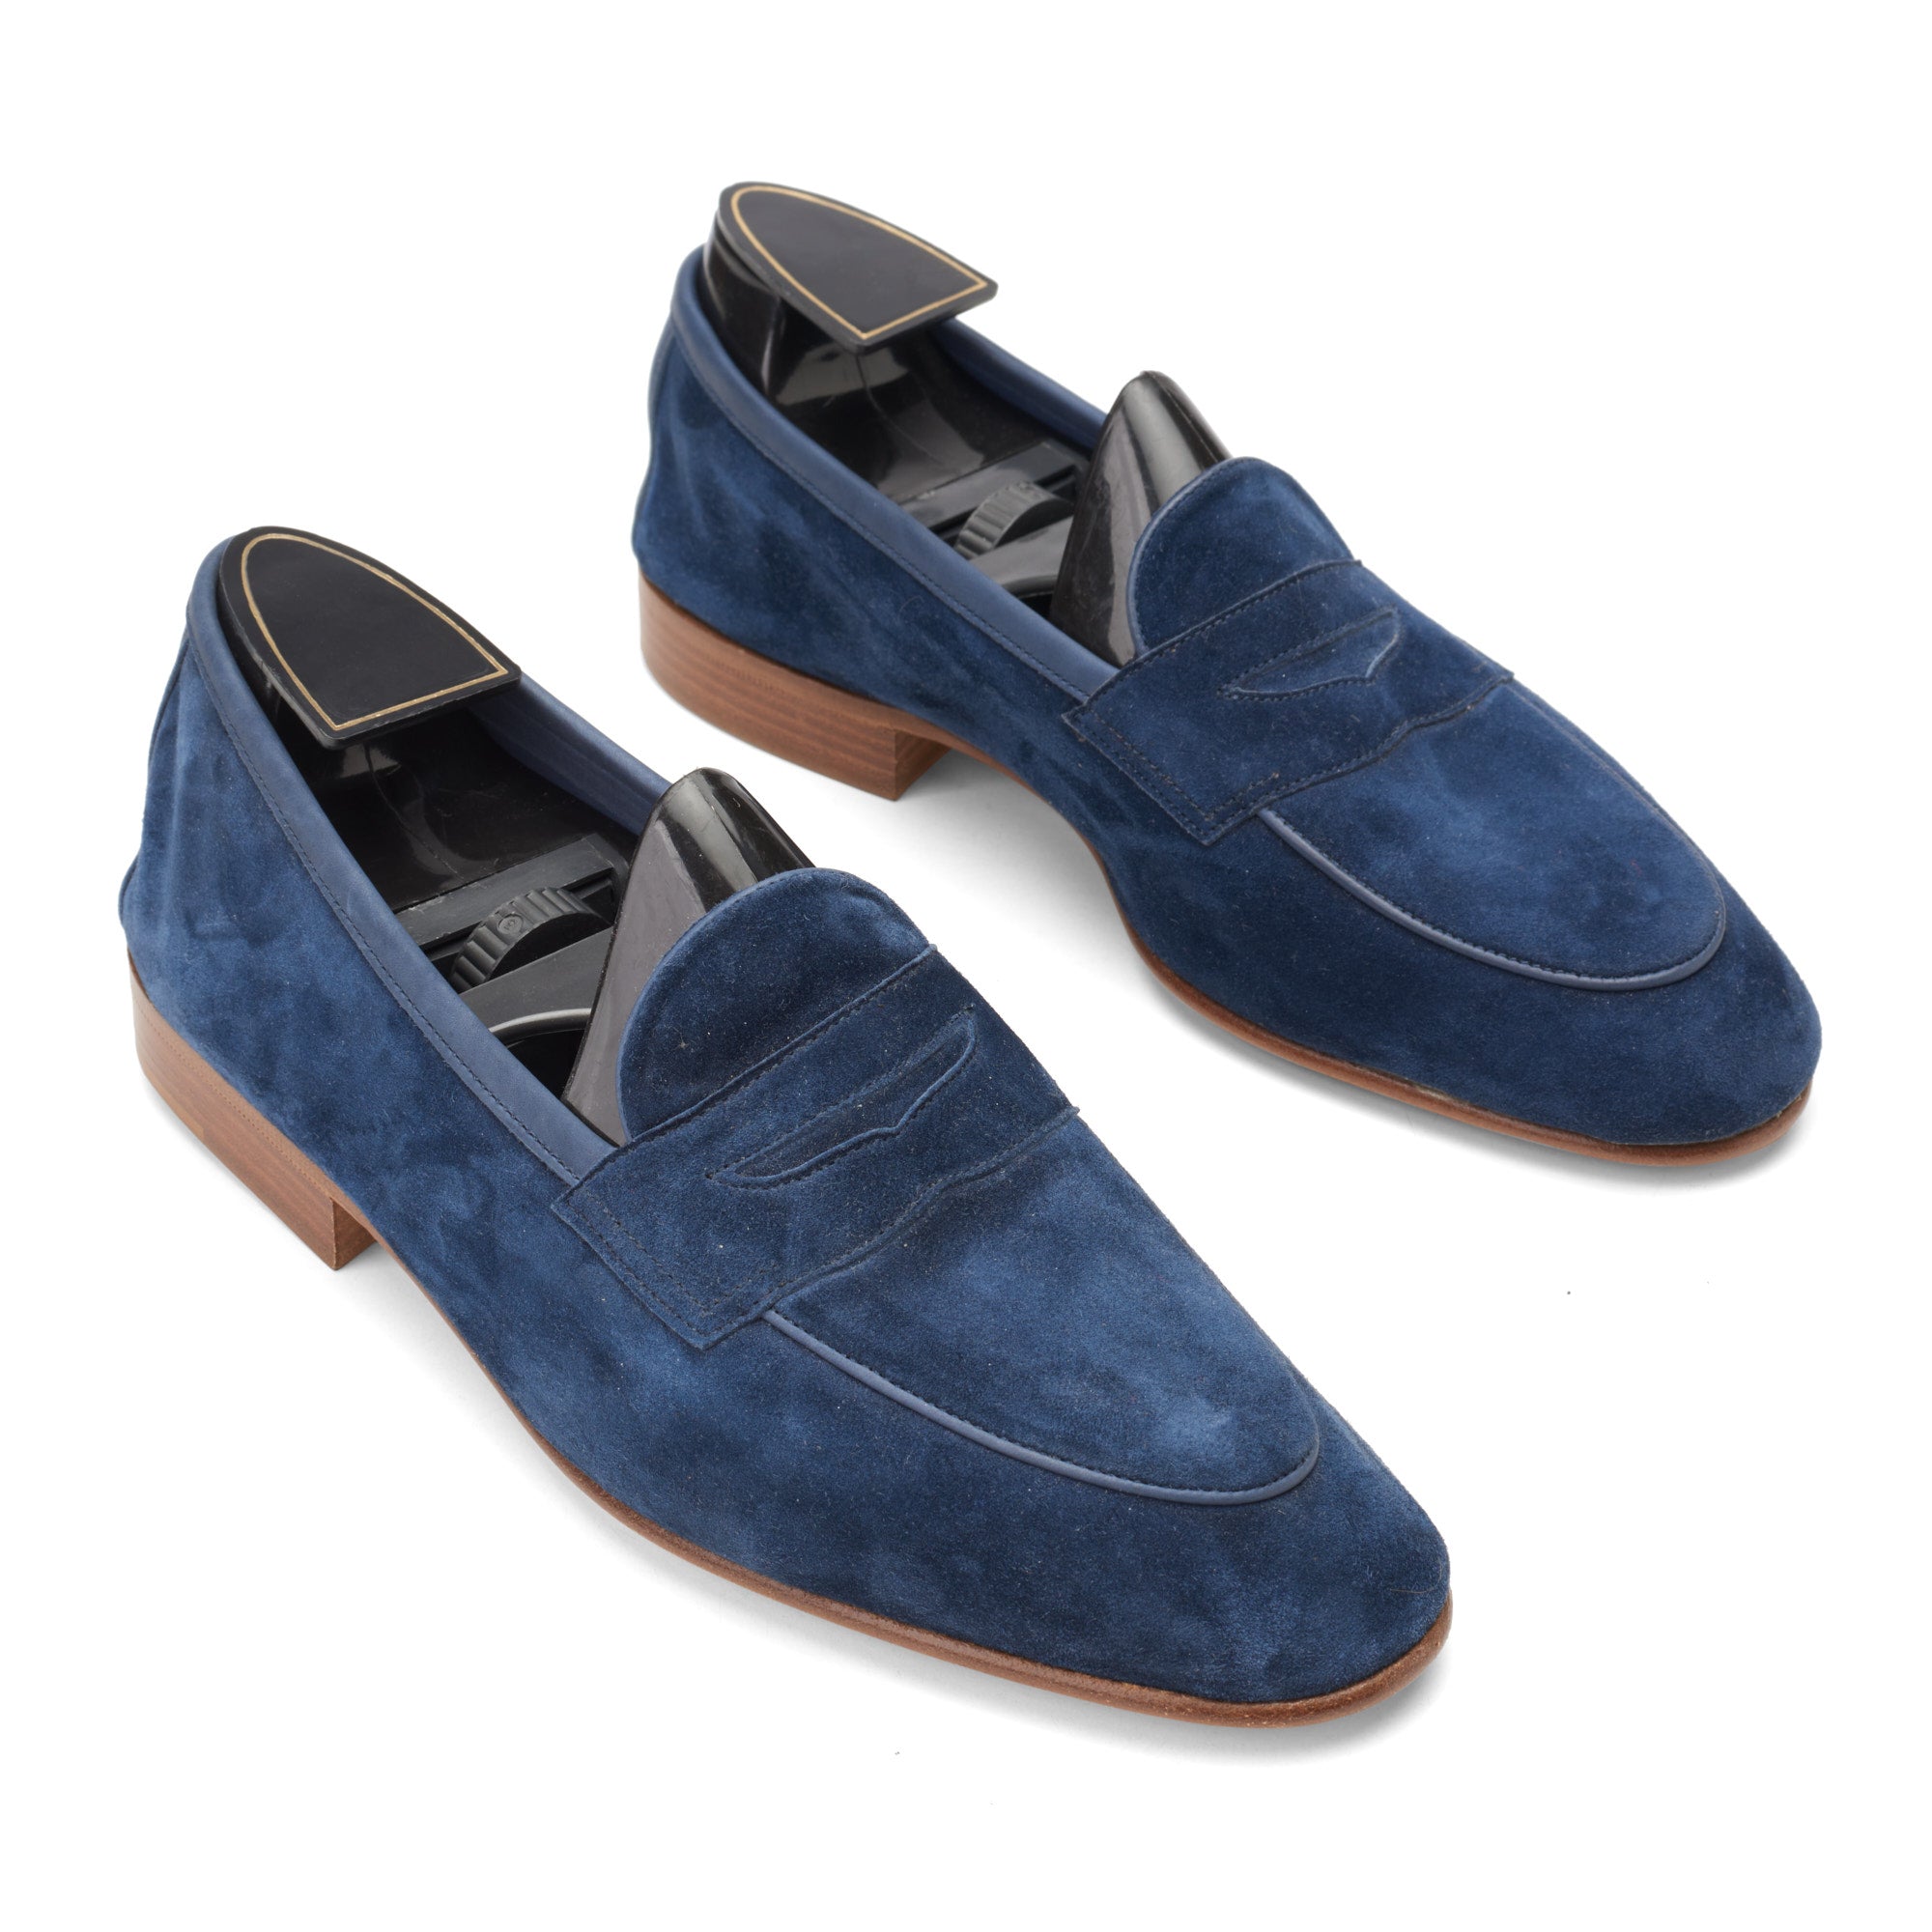 EDWARD GREEN "Polperro" Last 389 Navy Blue Suede Penny Loafers UK 6.5 NEW US 7